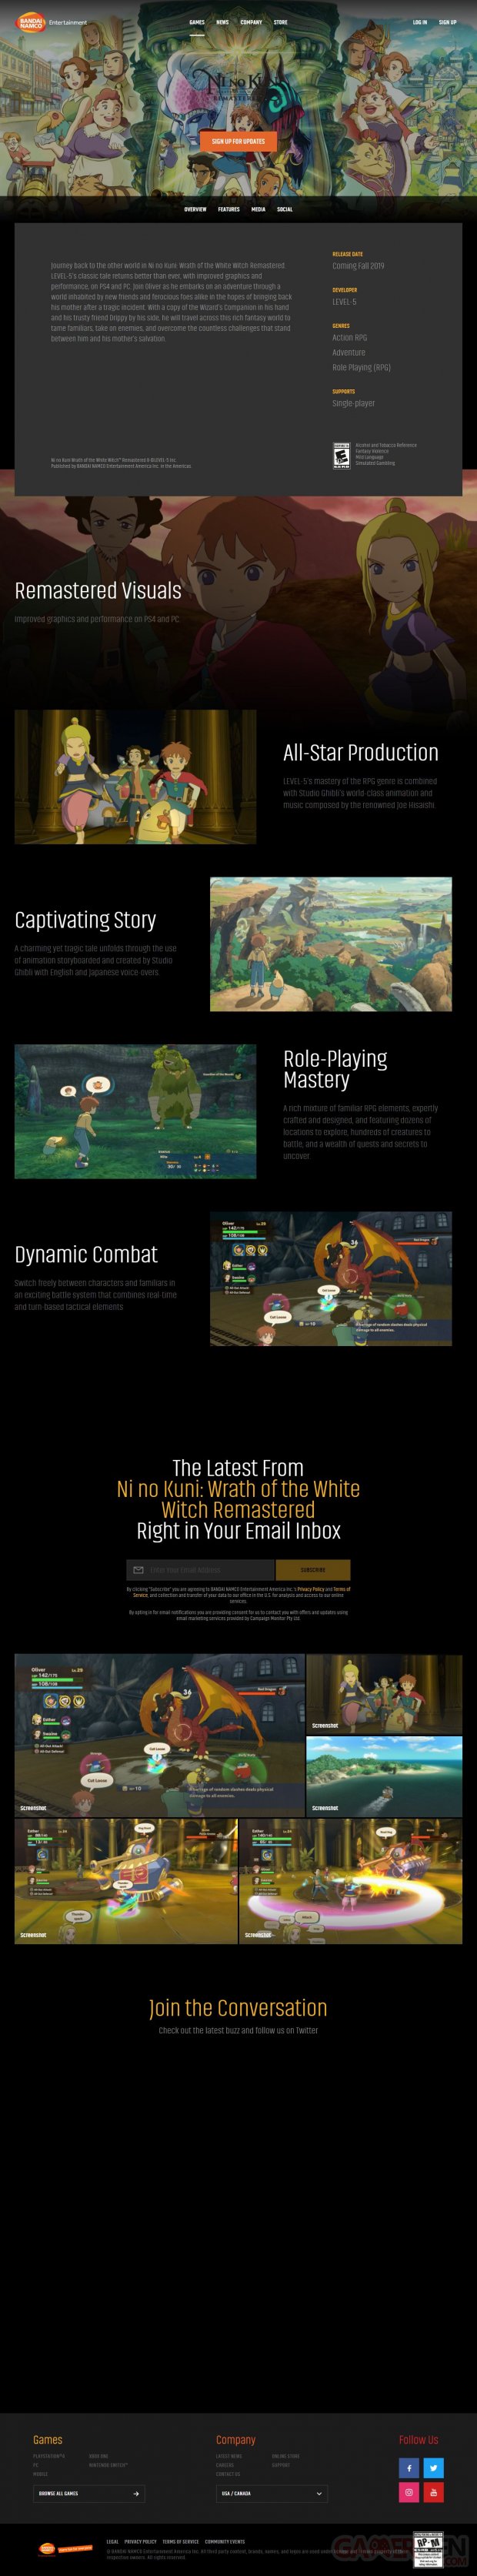 Ni no Kuni Wrath of the White Witch Remastered 10 08 06 2019